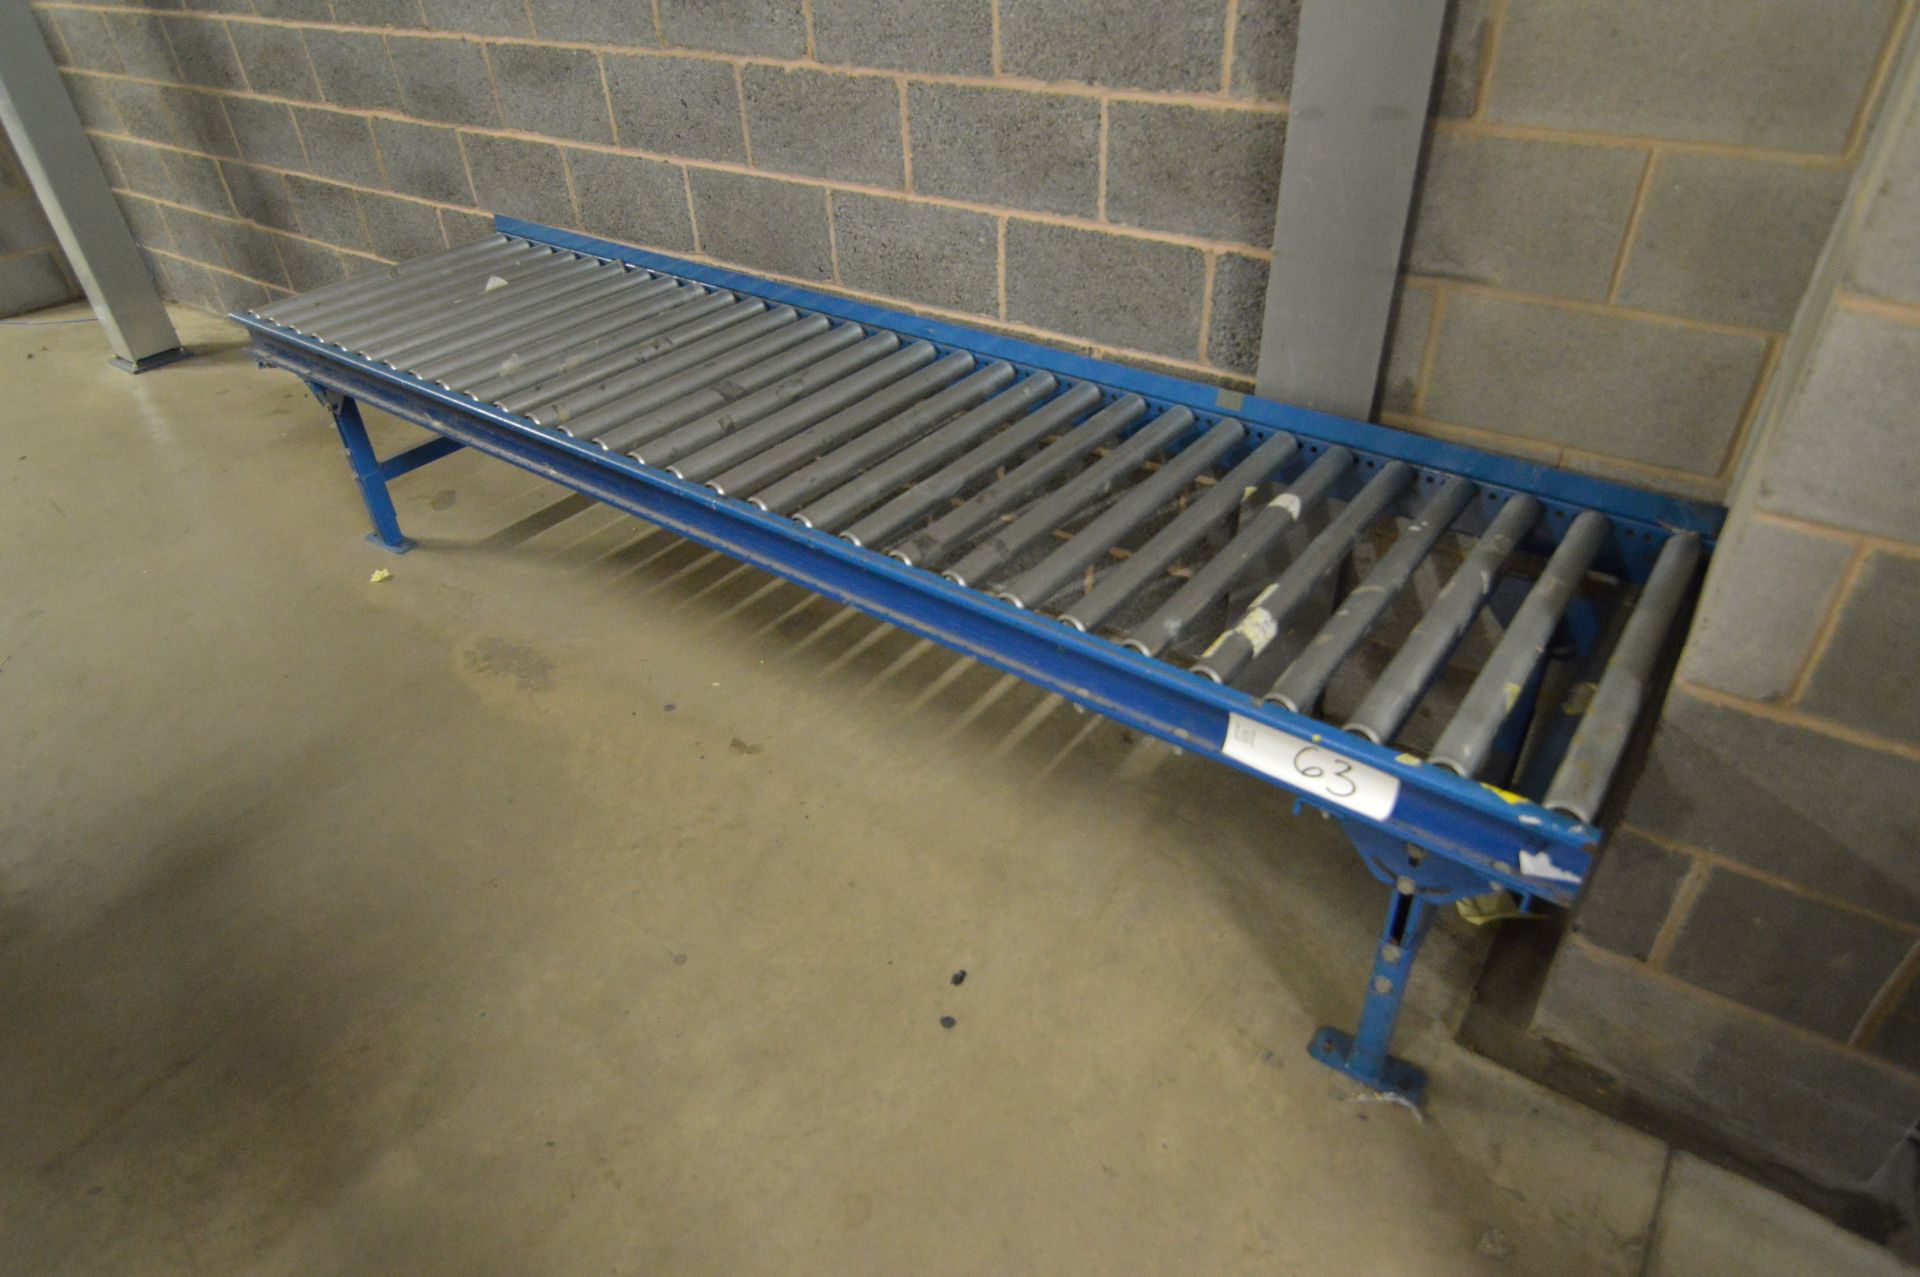 One Section of Roller Conveyor, approx. 3m long x